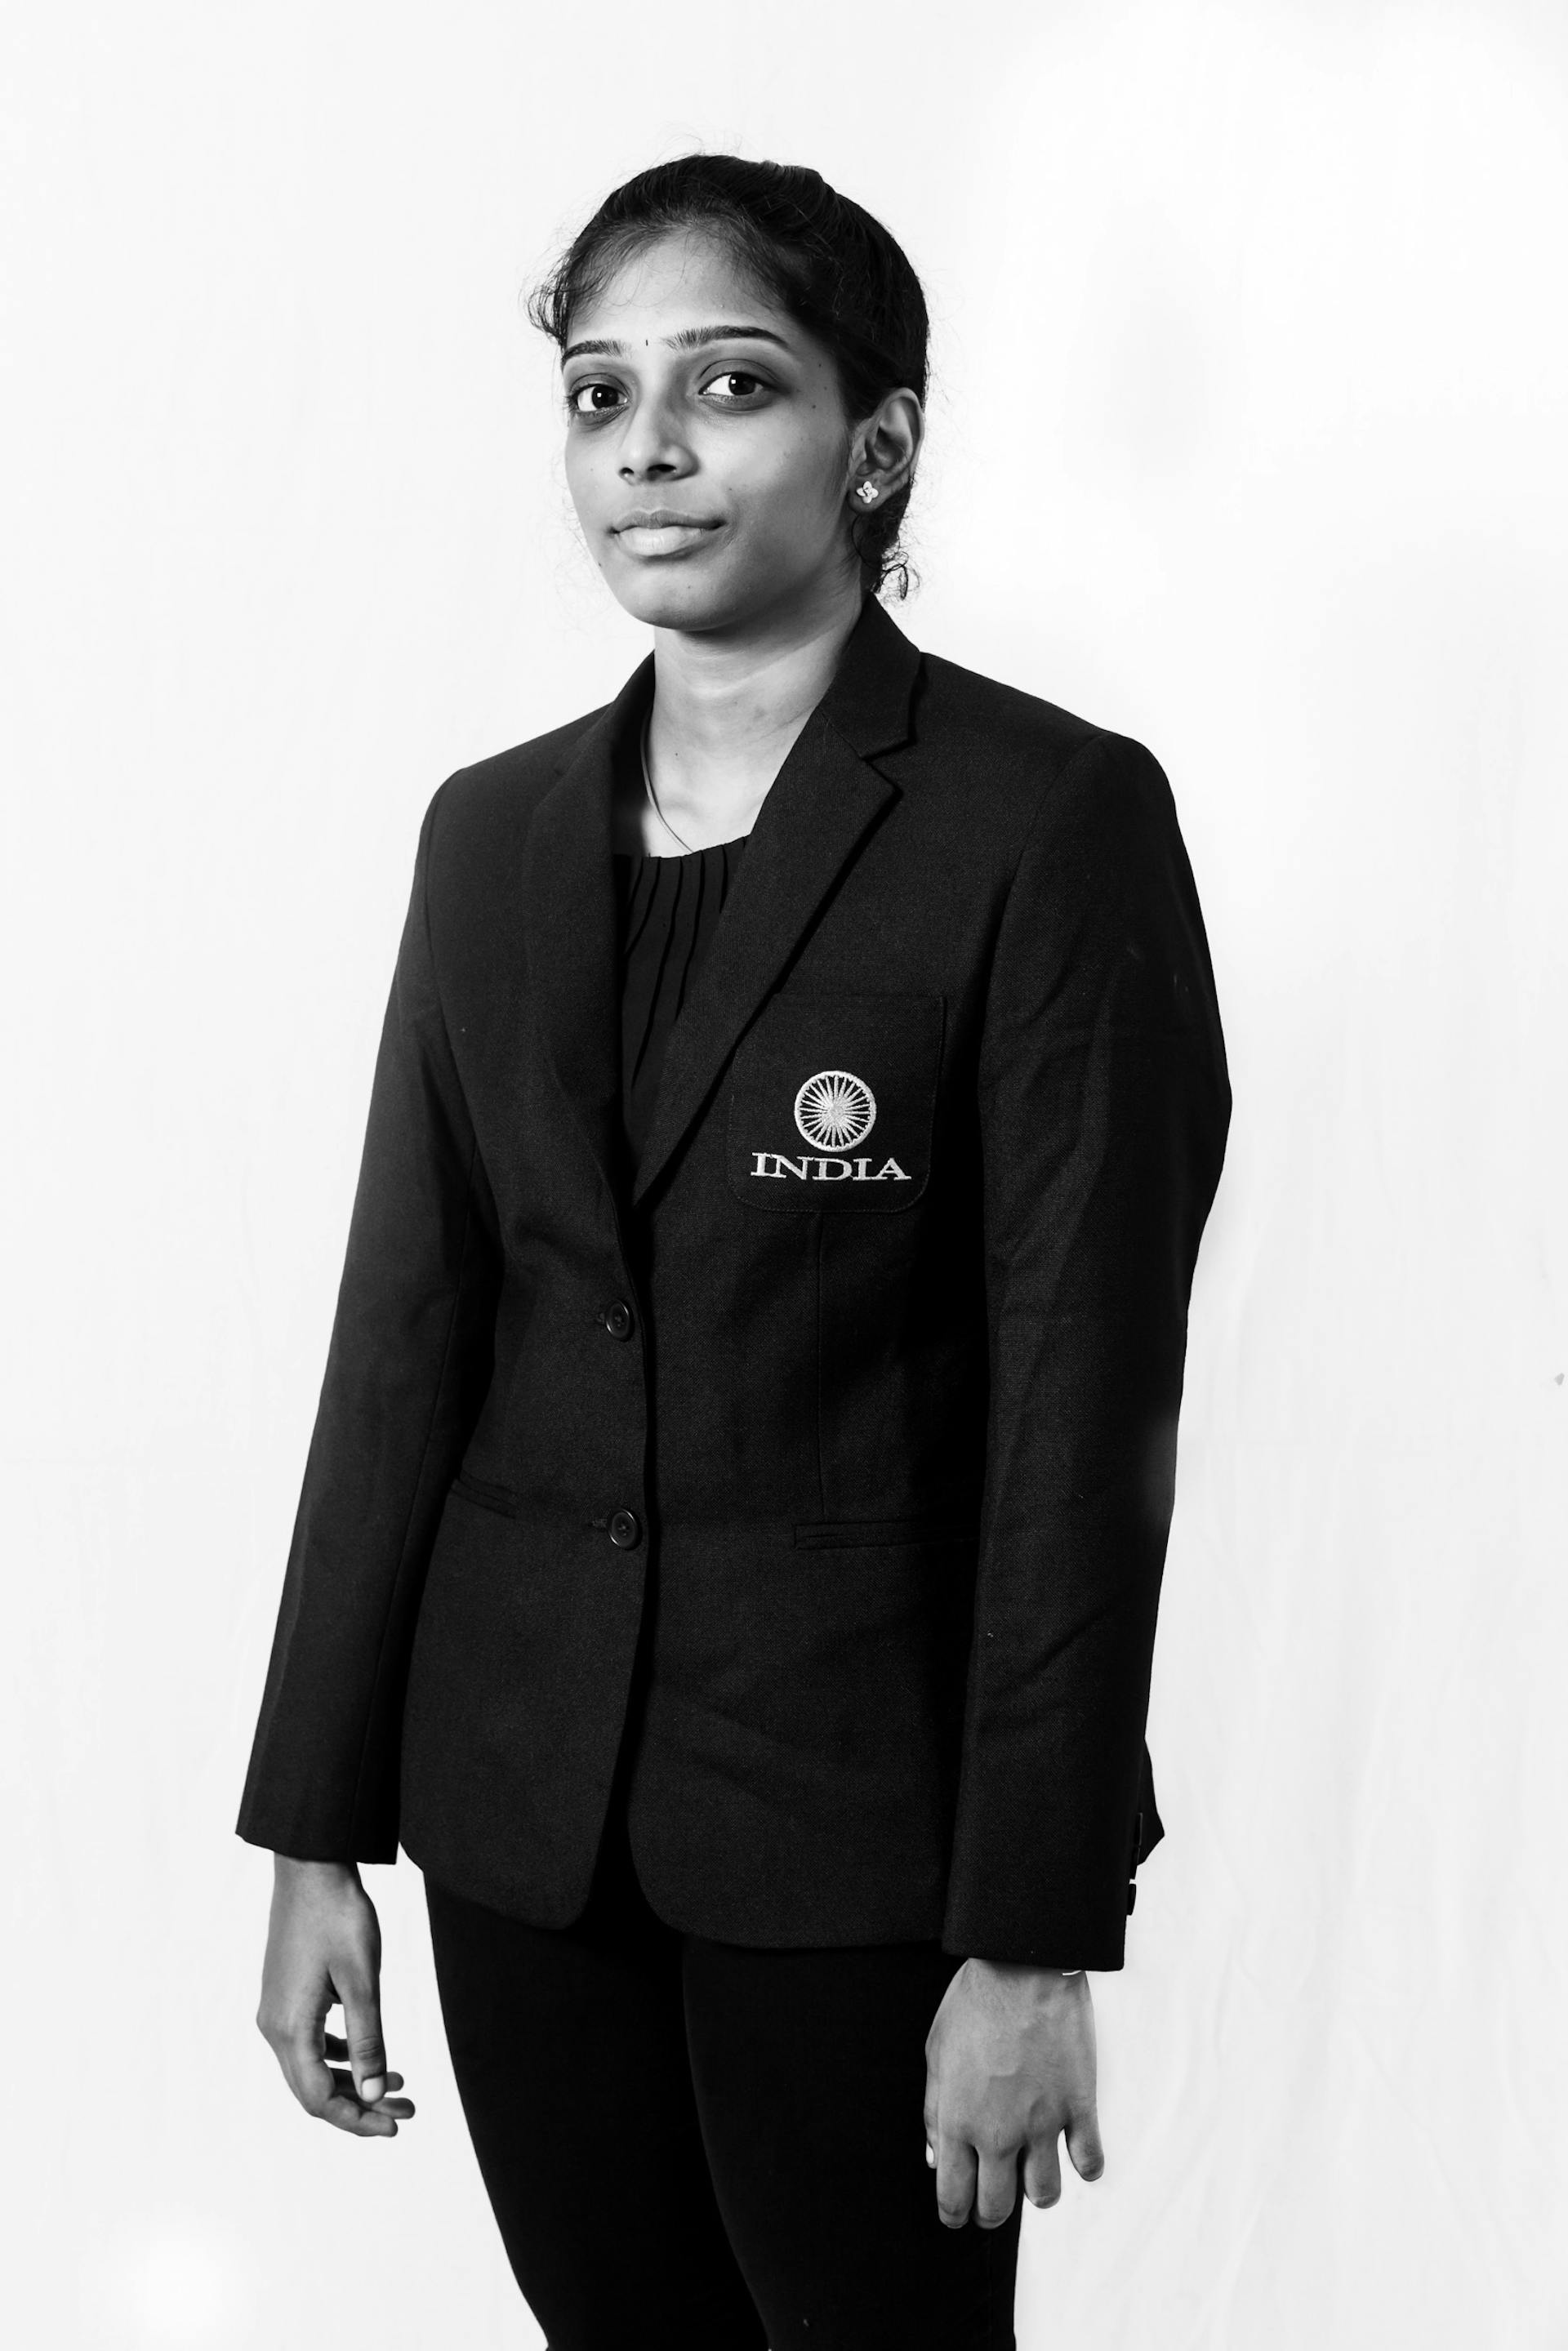 19-year-old Vaishali, Praggnanandhaa’s sibling, achieved the third and final Woman Grandmaster norm at a tournament in Latvia in August 2018. Picture Credit: Harsha Vadlamani